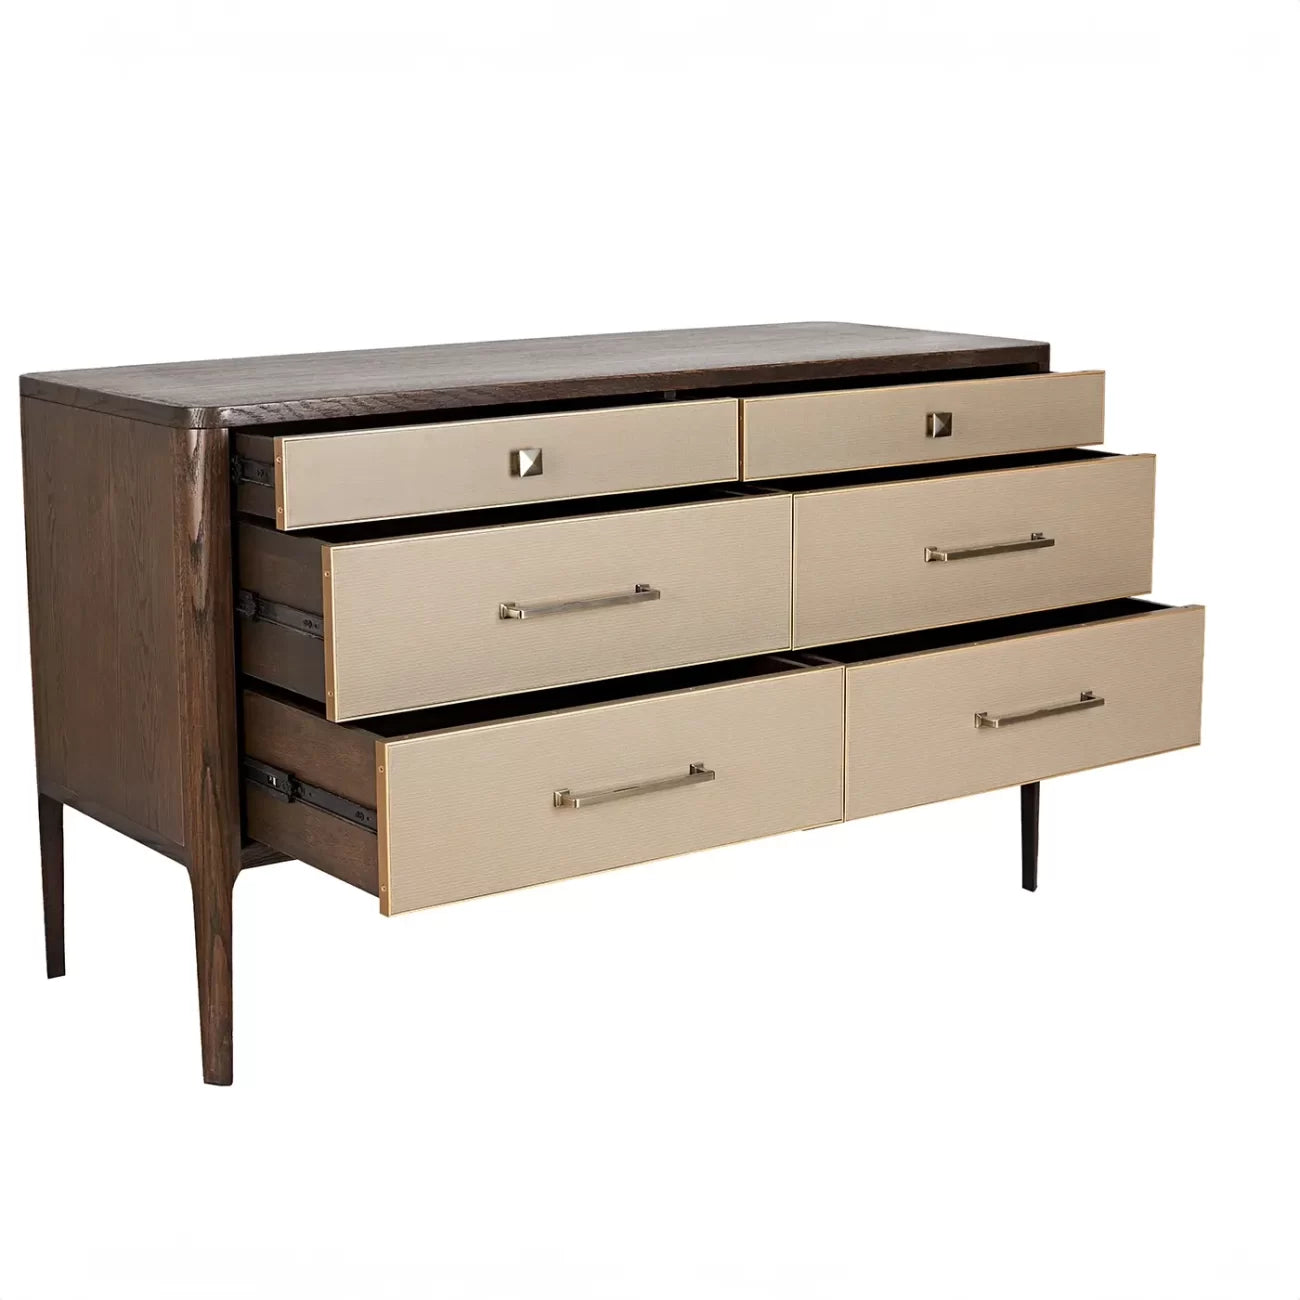 Hudson 6 drawer chest faux leather